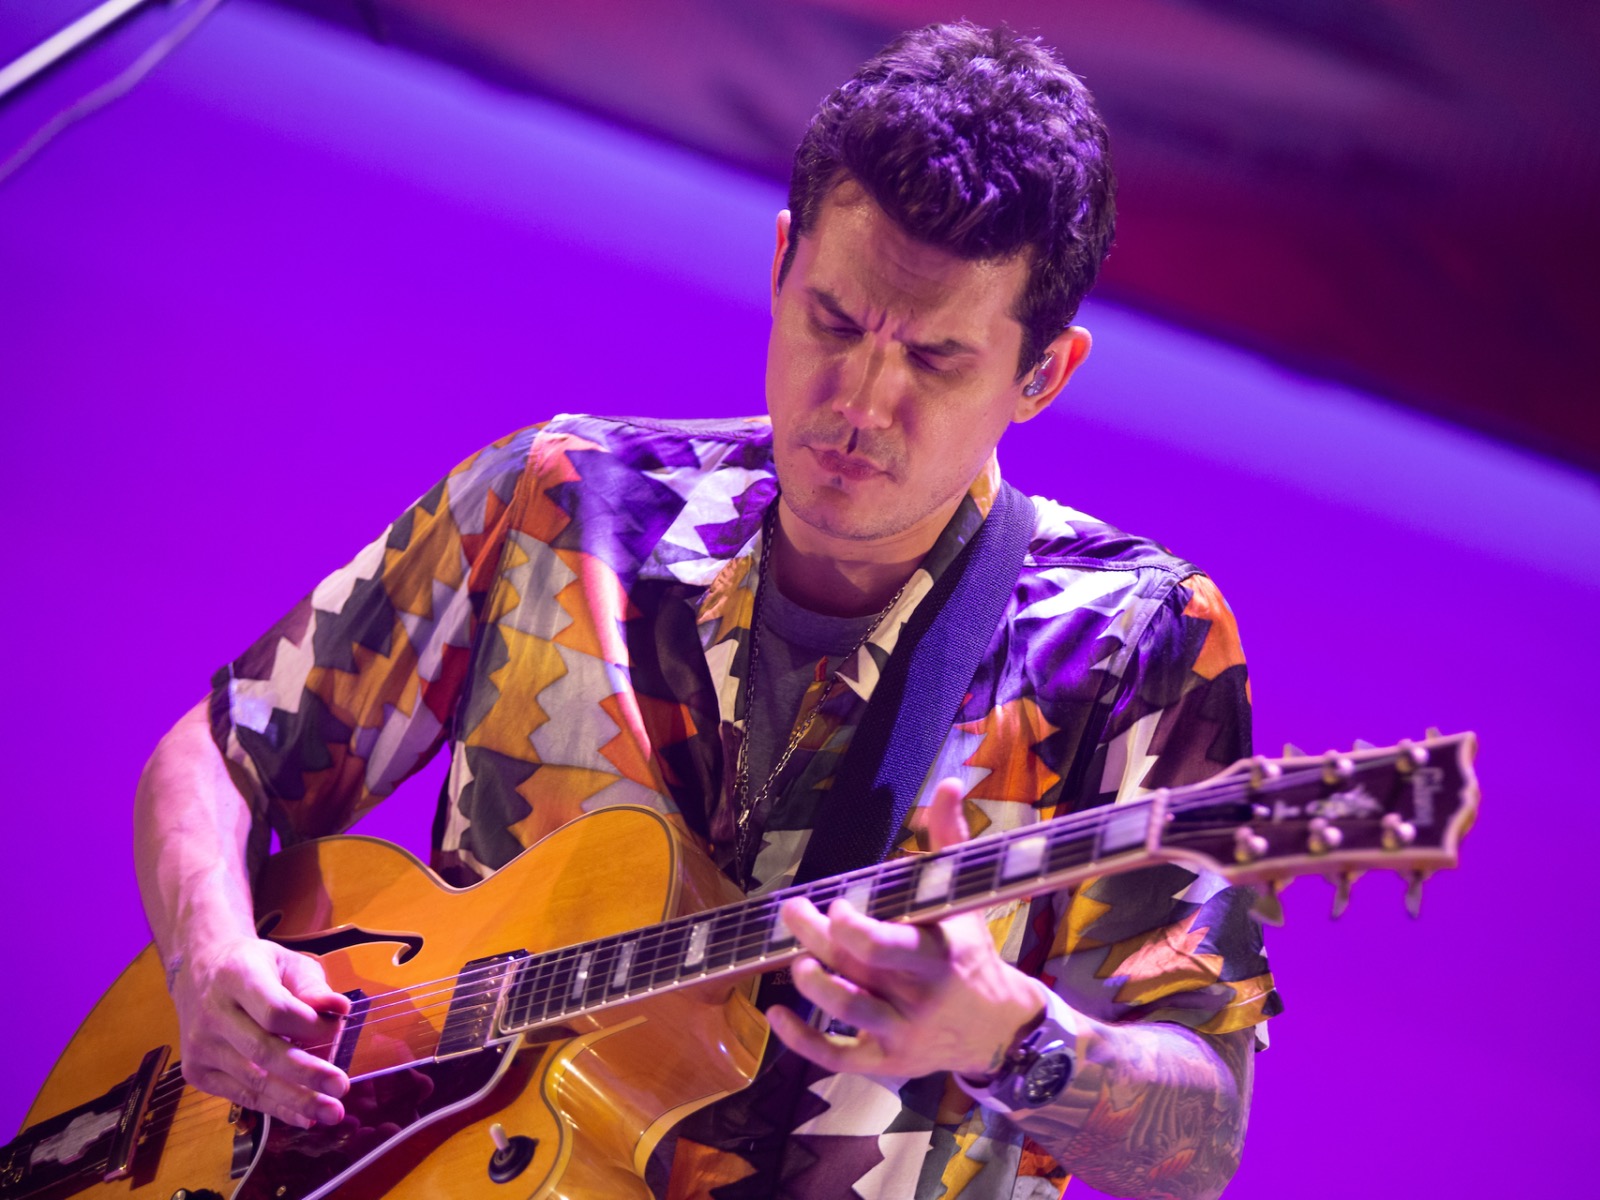 Our Favorite Things About John Mayer S Concert At Fiserv Forum Images, Photos, Reviews